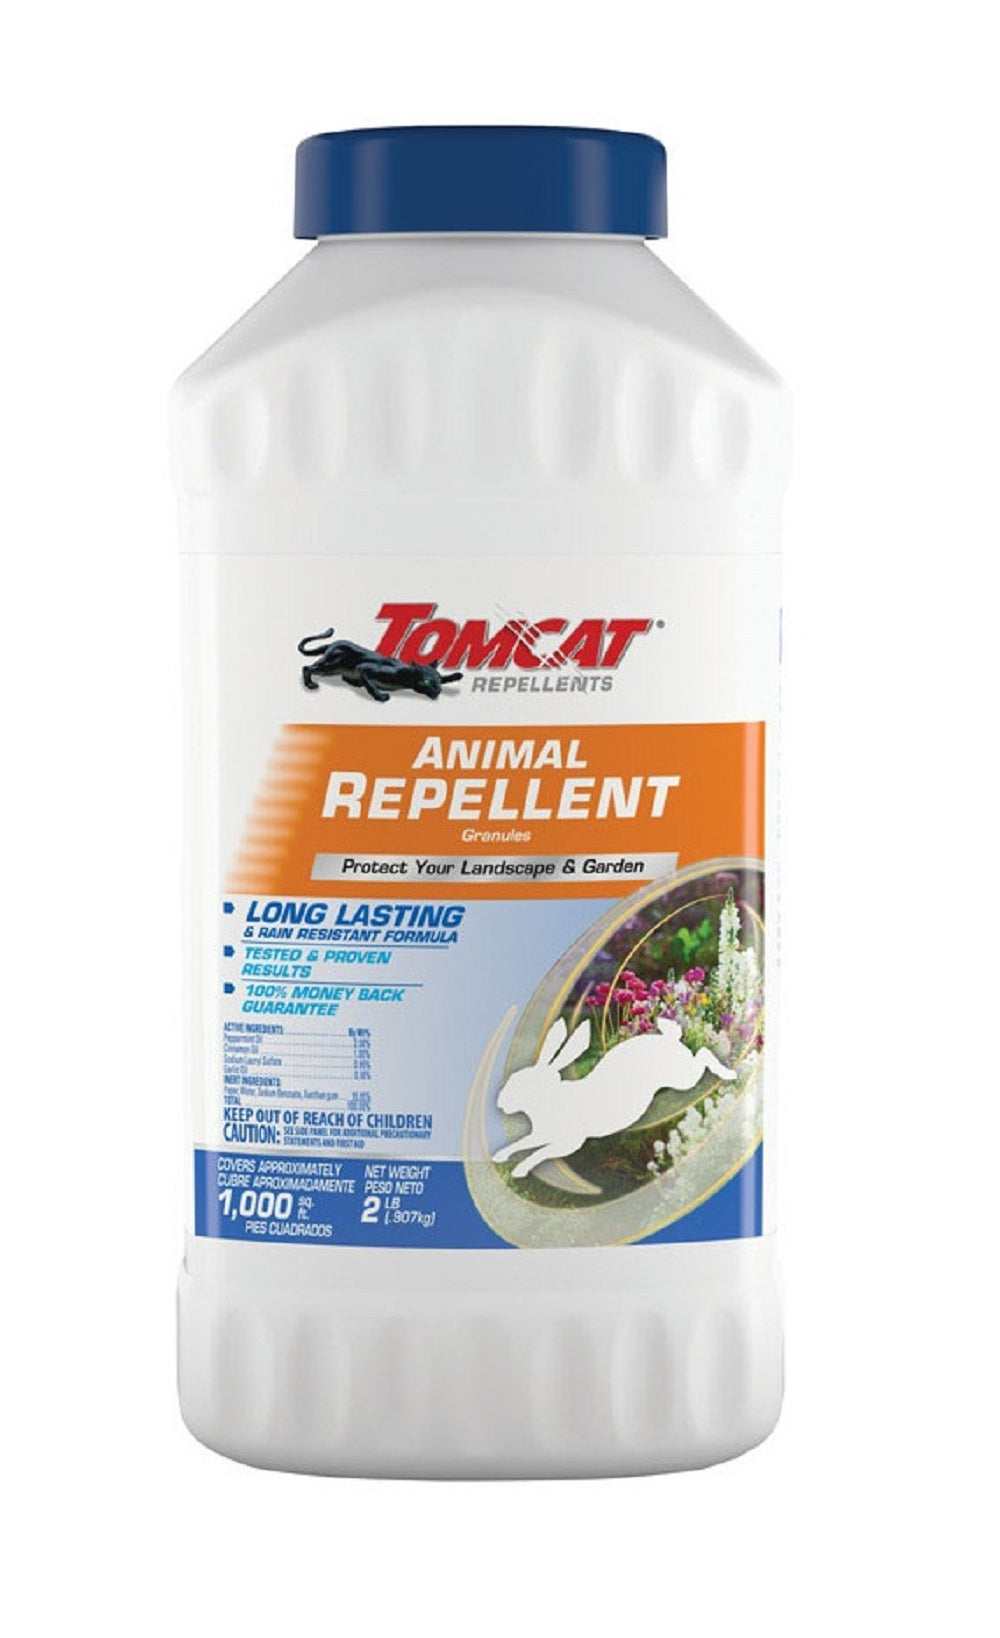 Buy tomcat animal repellent - Online store for pest control, animal repellent in USA, on sale, low price, discount deals, coupon code